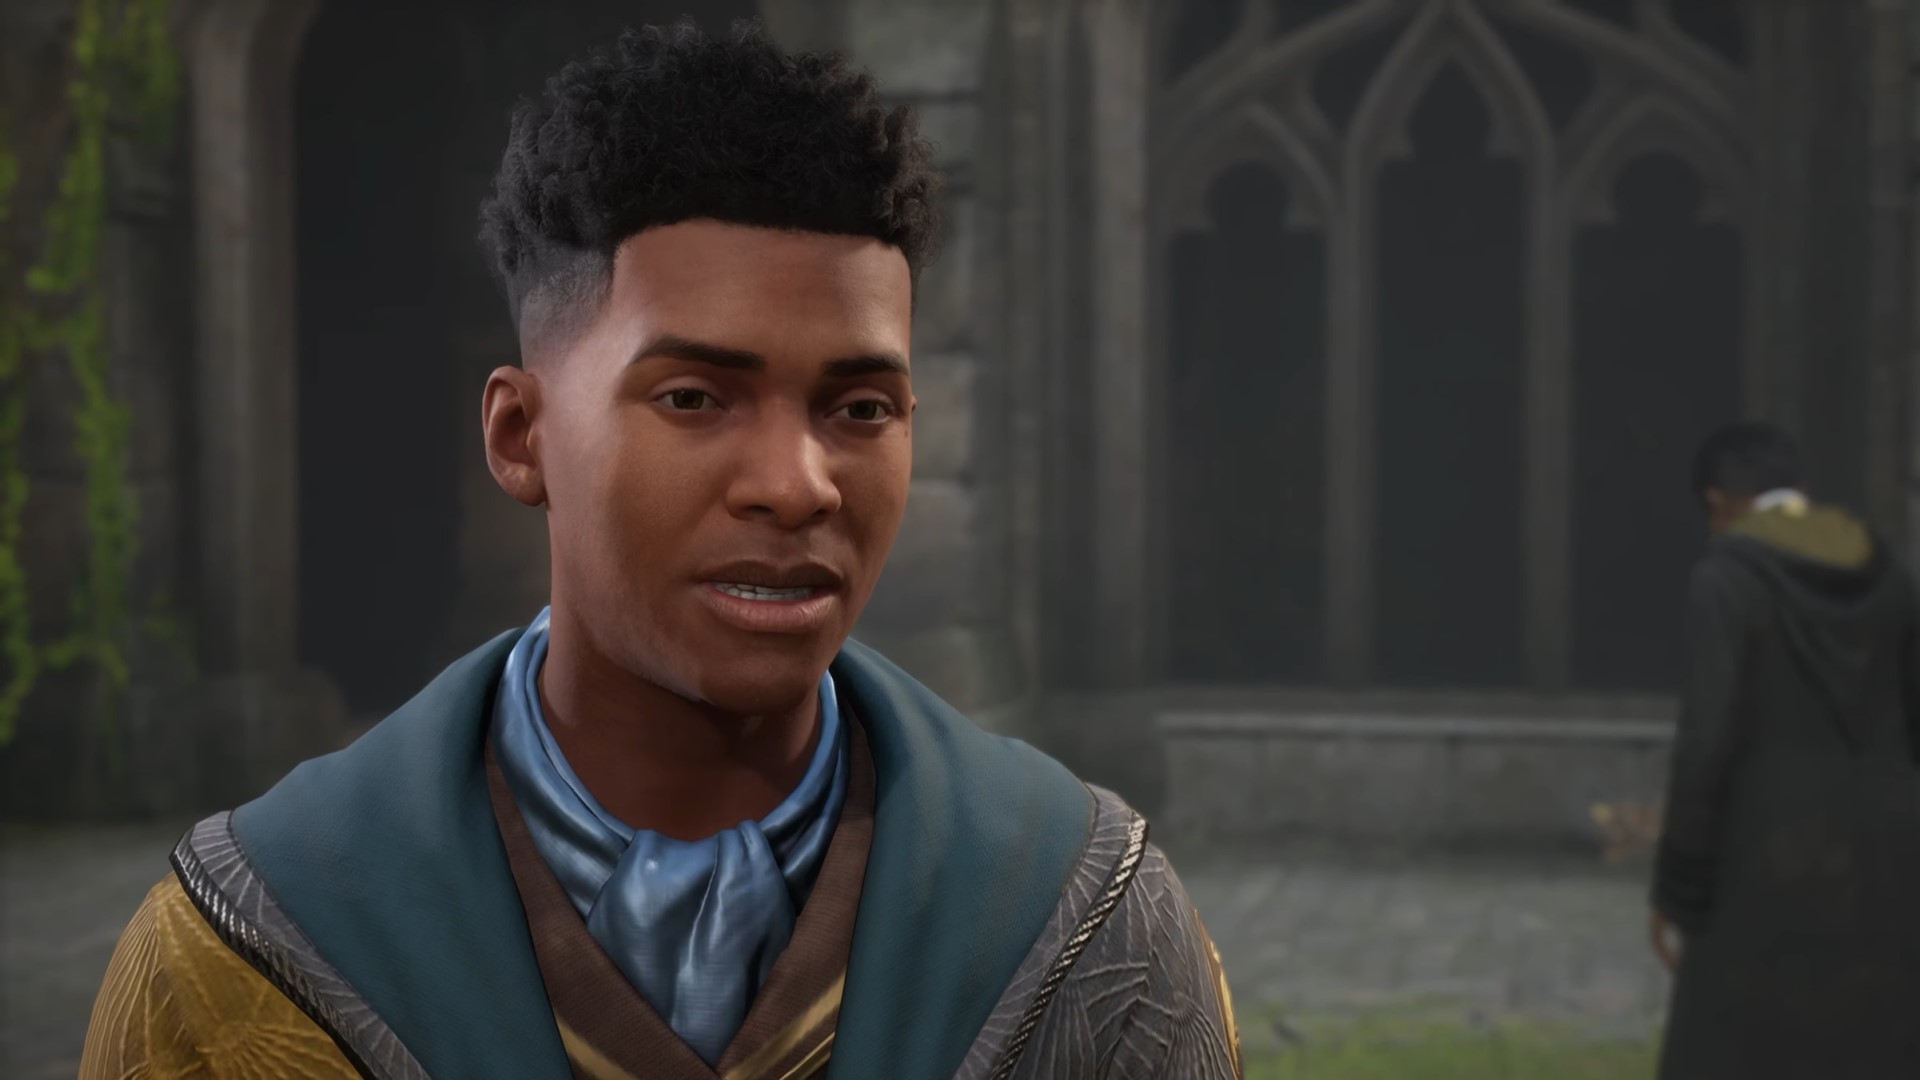 Hogwarts Legacy gameplay video showcases character creation, combat